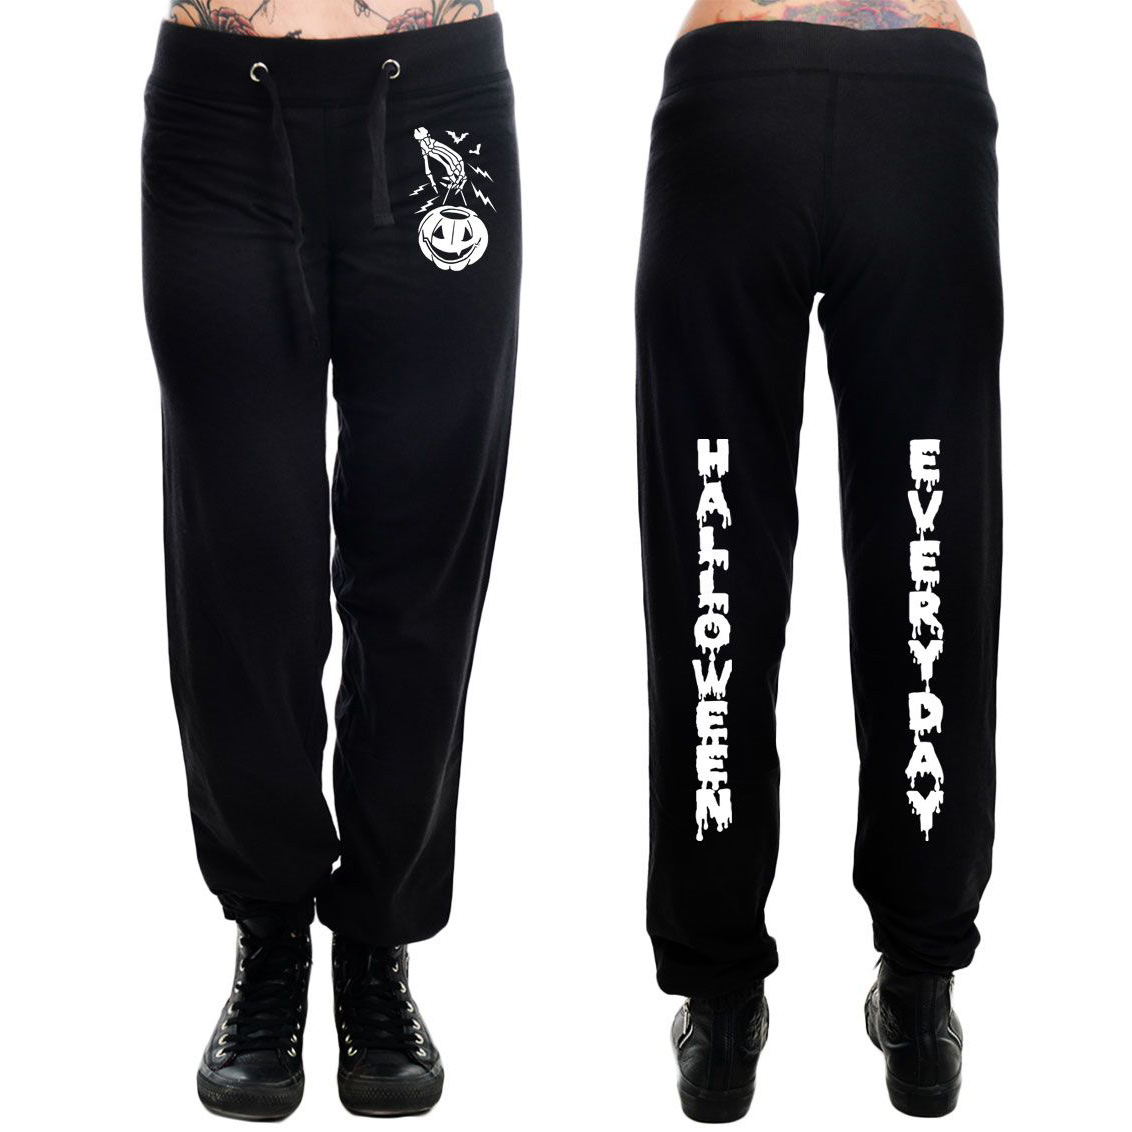 Sweatpants by Too Fast Clothing - Halloween Everyday